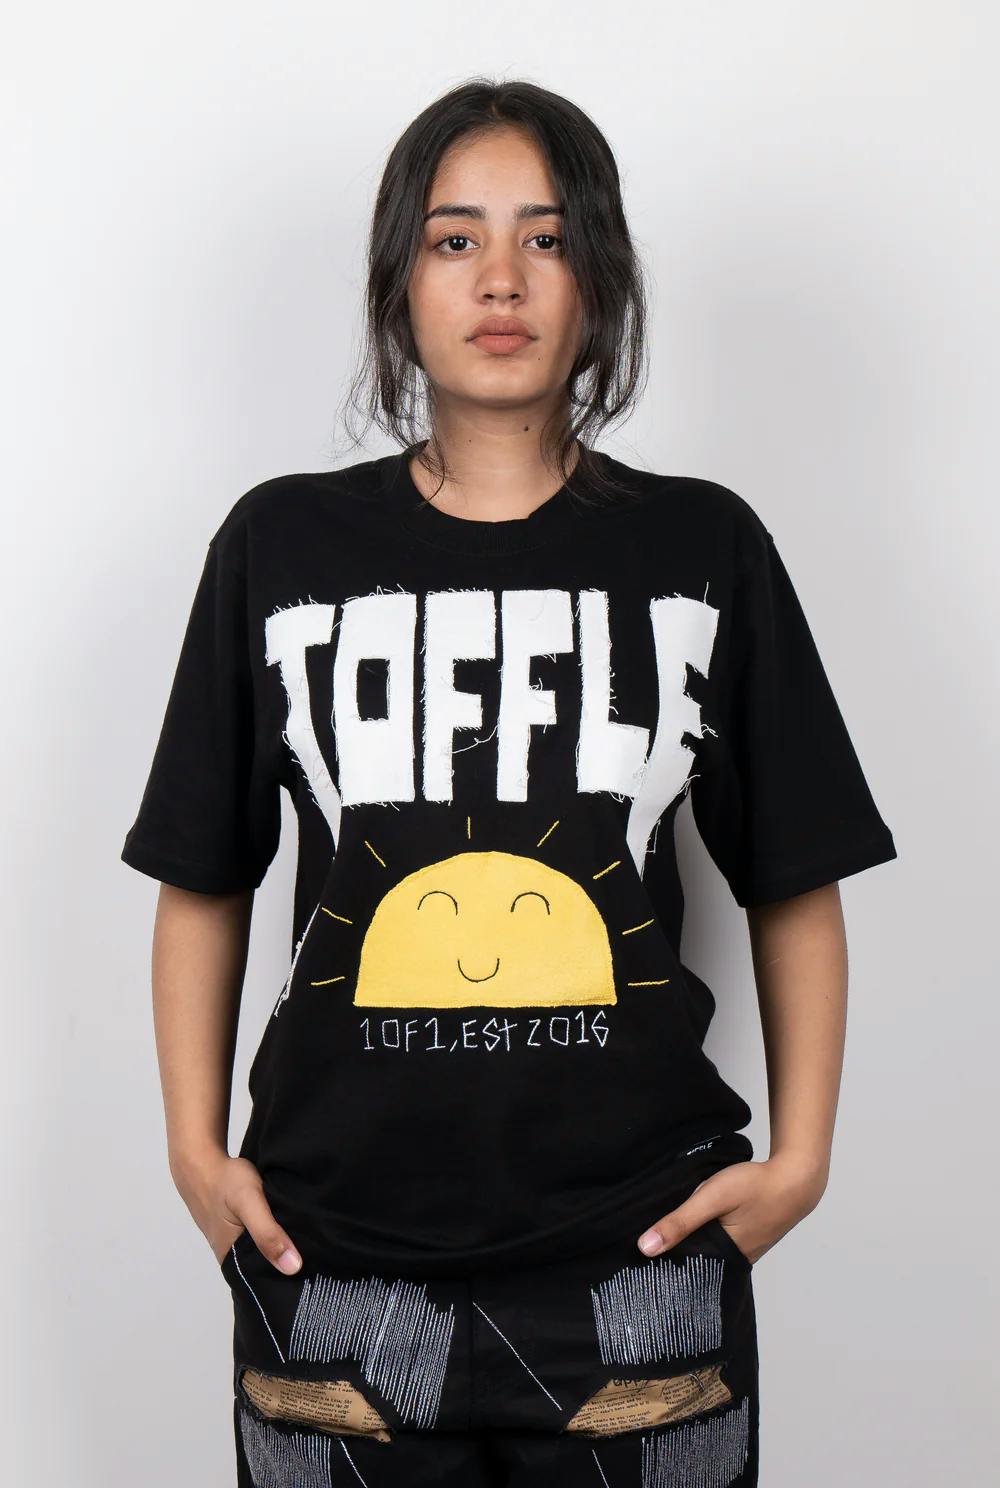 Dawn Black T-shirt, a product by TOFFLE